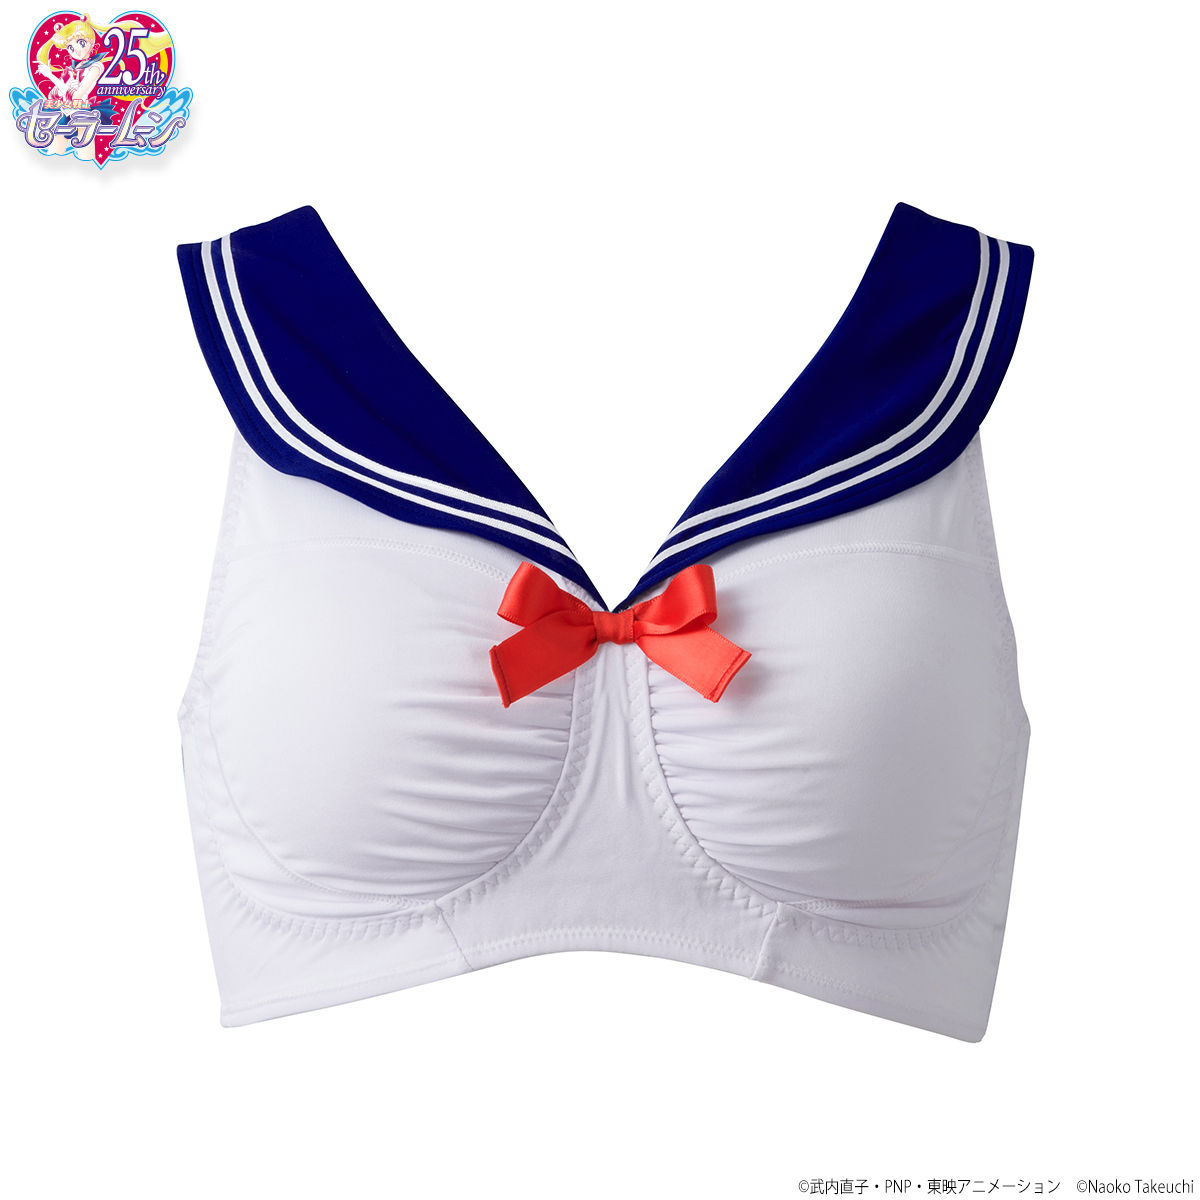 Sailor Moon celebrating 25th anniversary, Bandai’s official online store Pr...